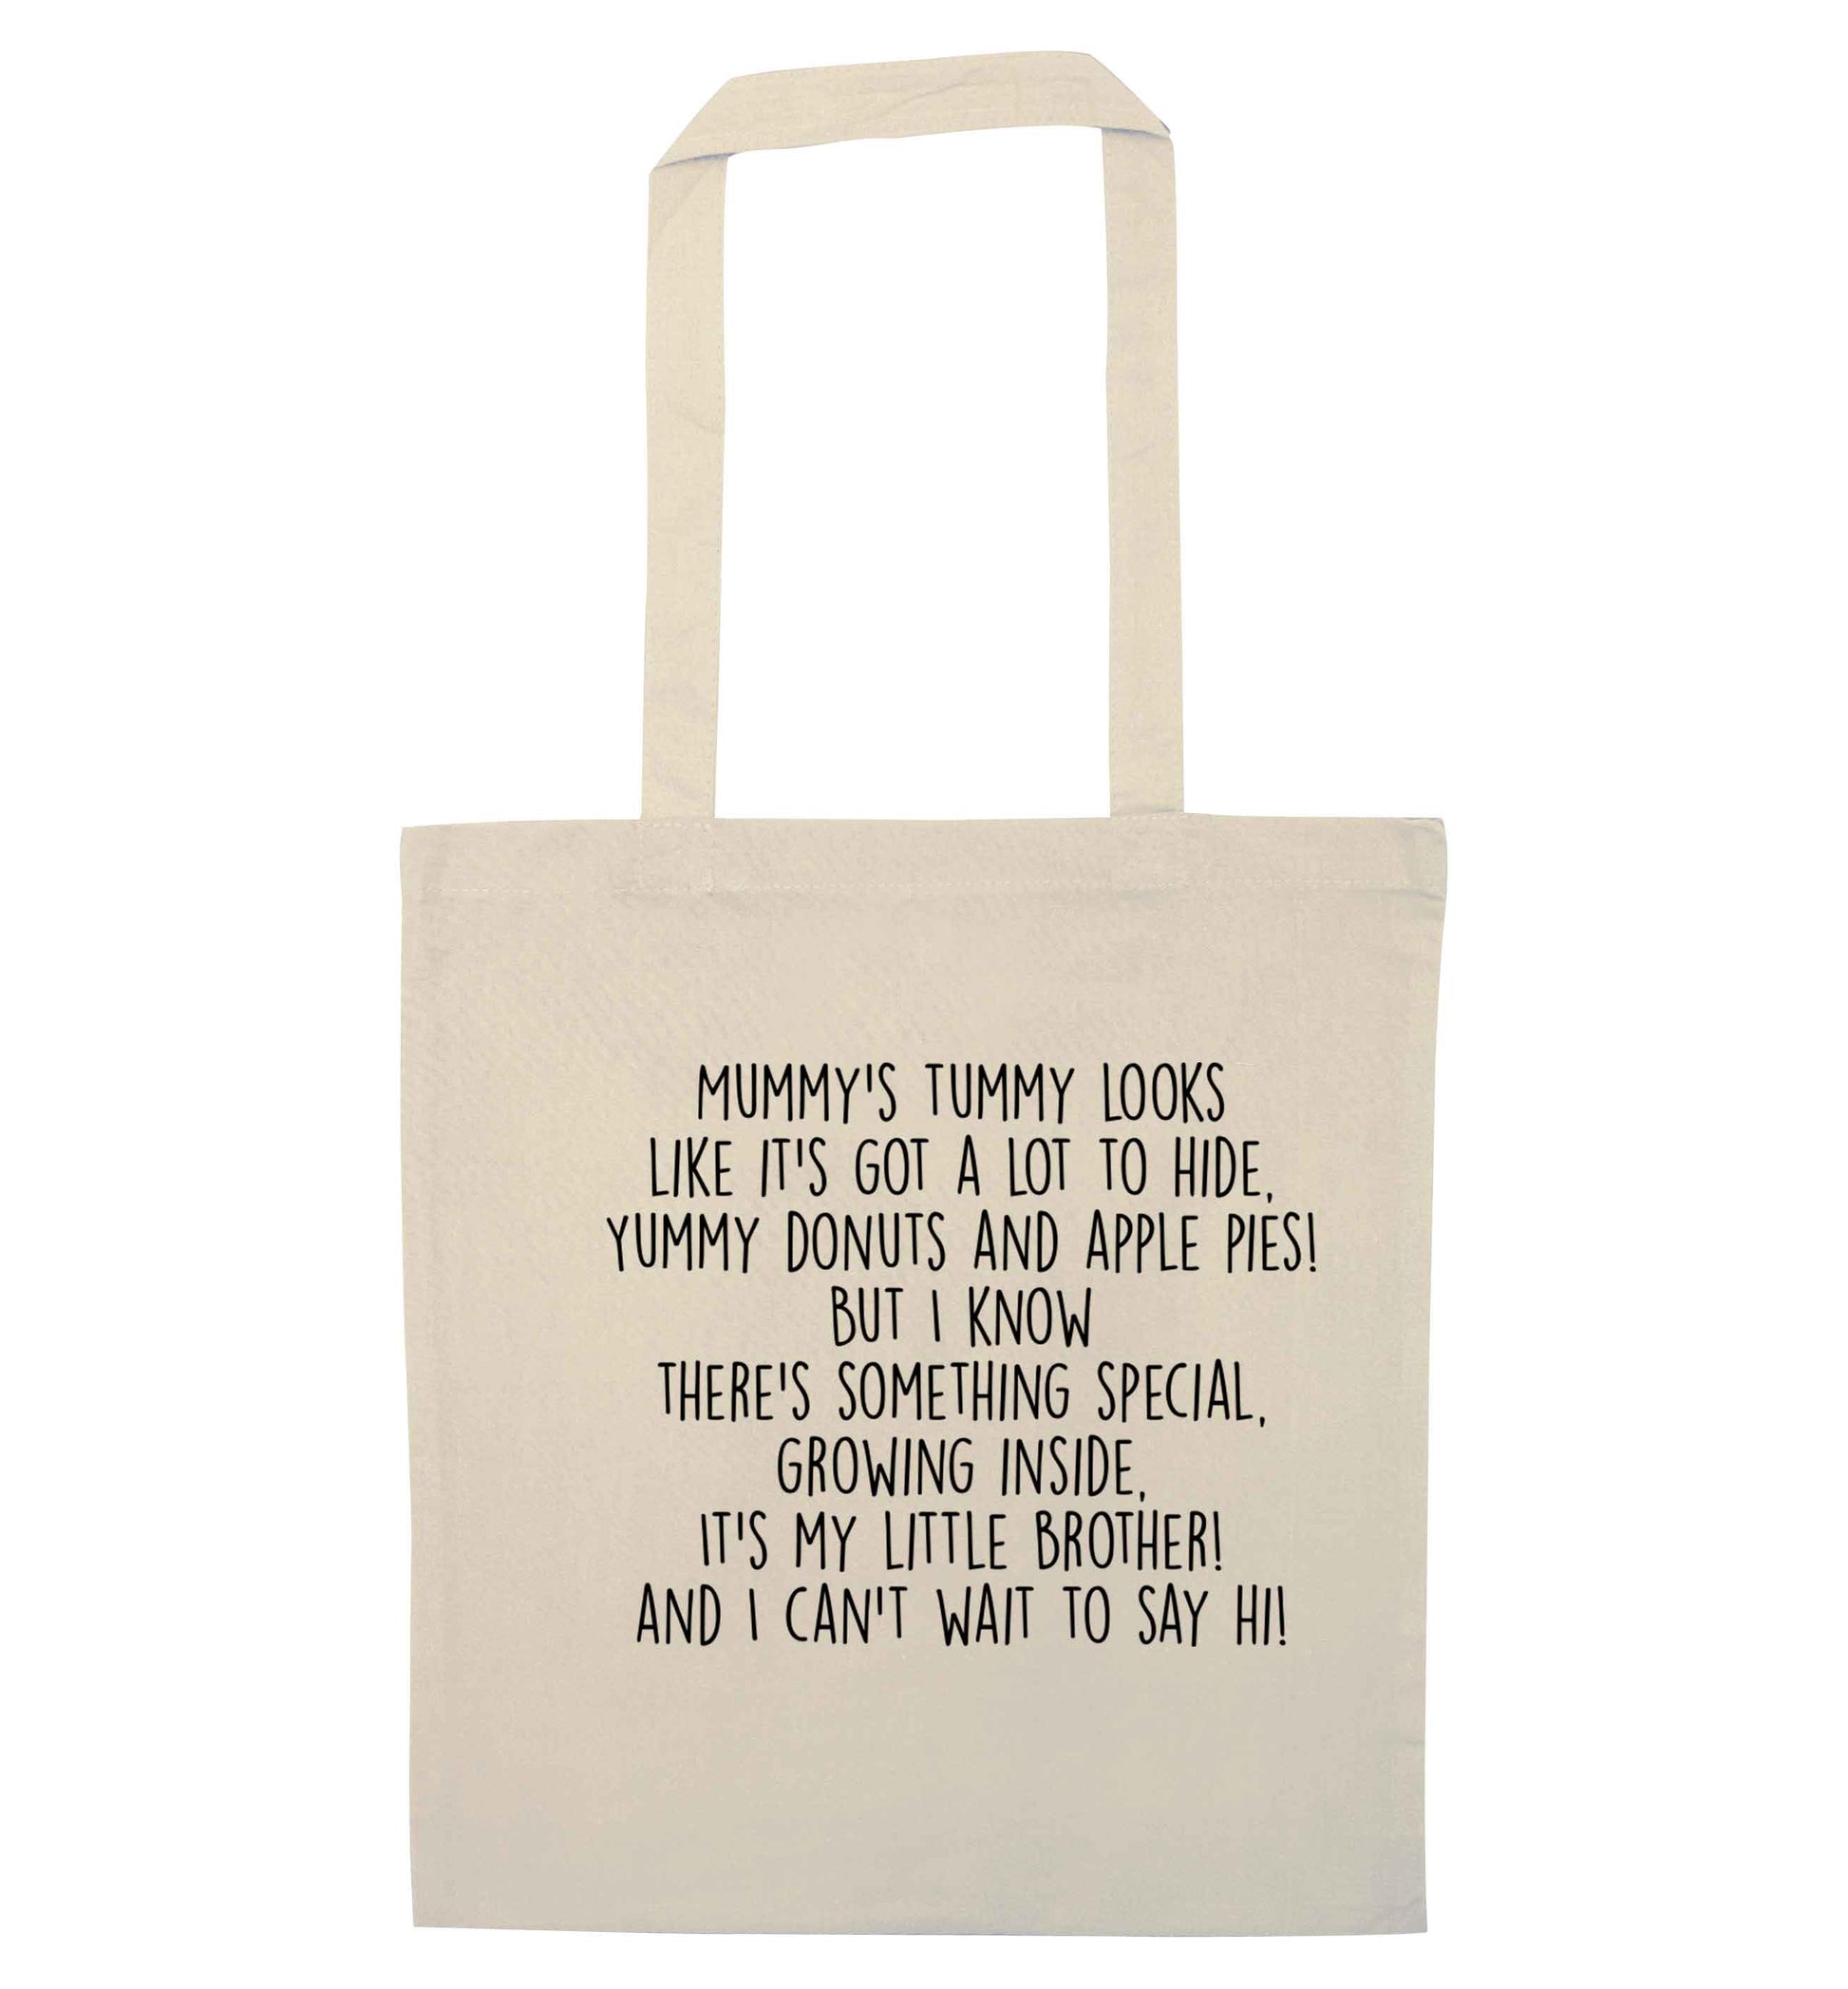 Something special growing inside it's my little brother I can't wait to say hi! natural tote bag